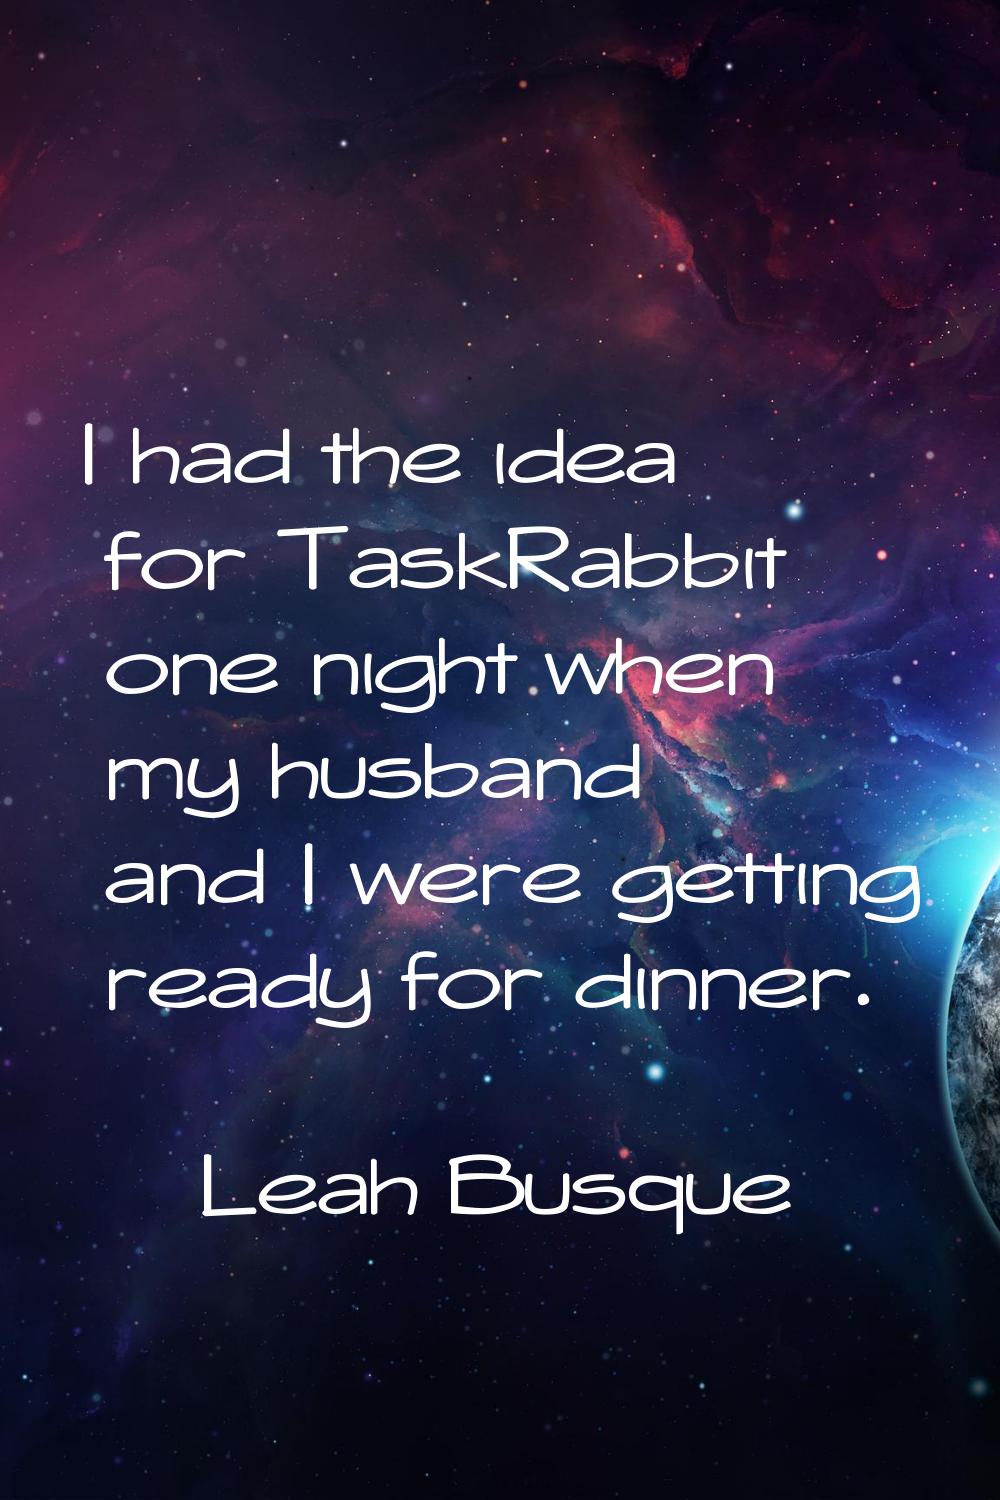 I had the idea for TaskRabbit one night when my husband and I were getting ready for dinner.